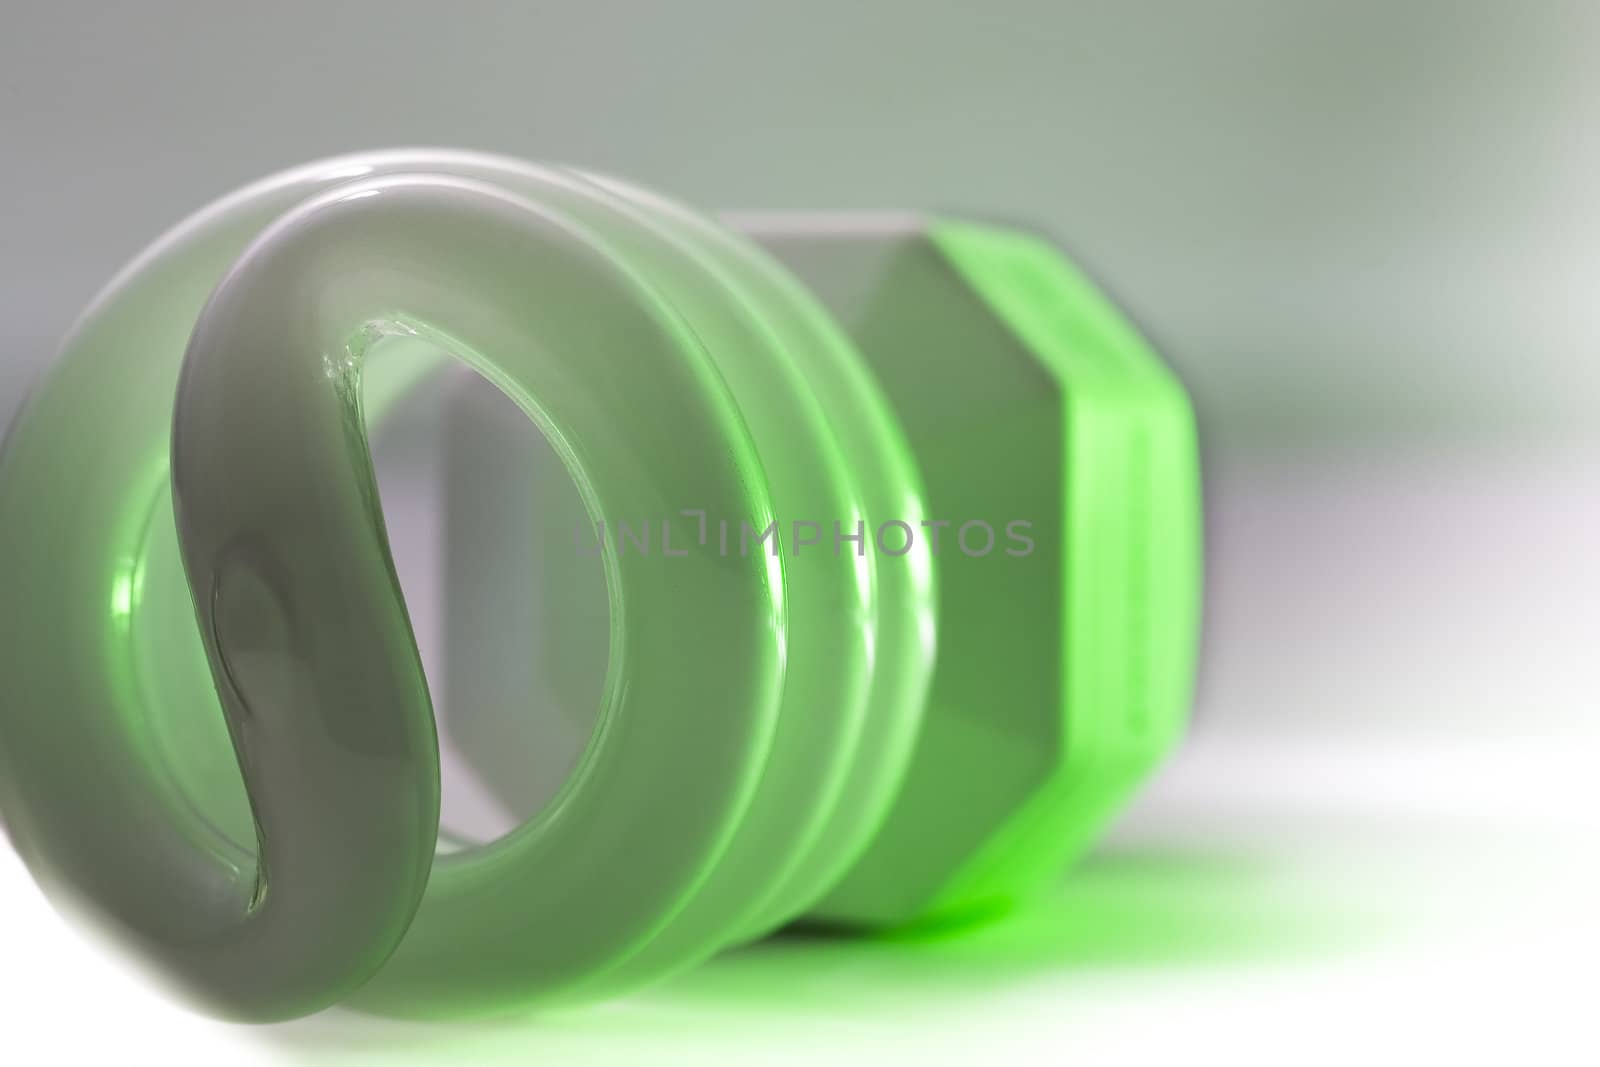 A green glowing compact fluorescent bulb.